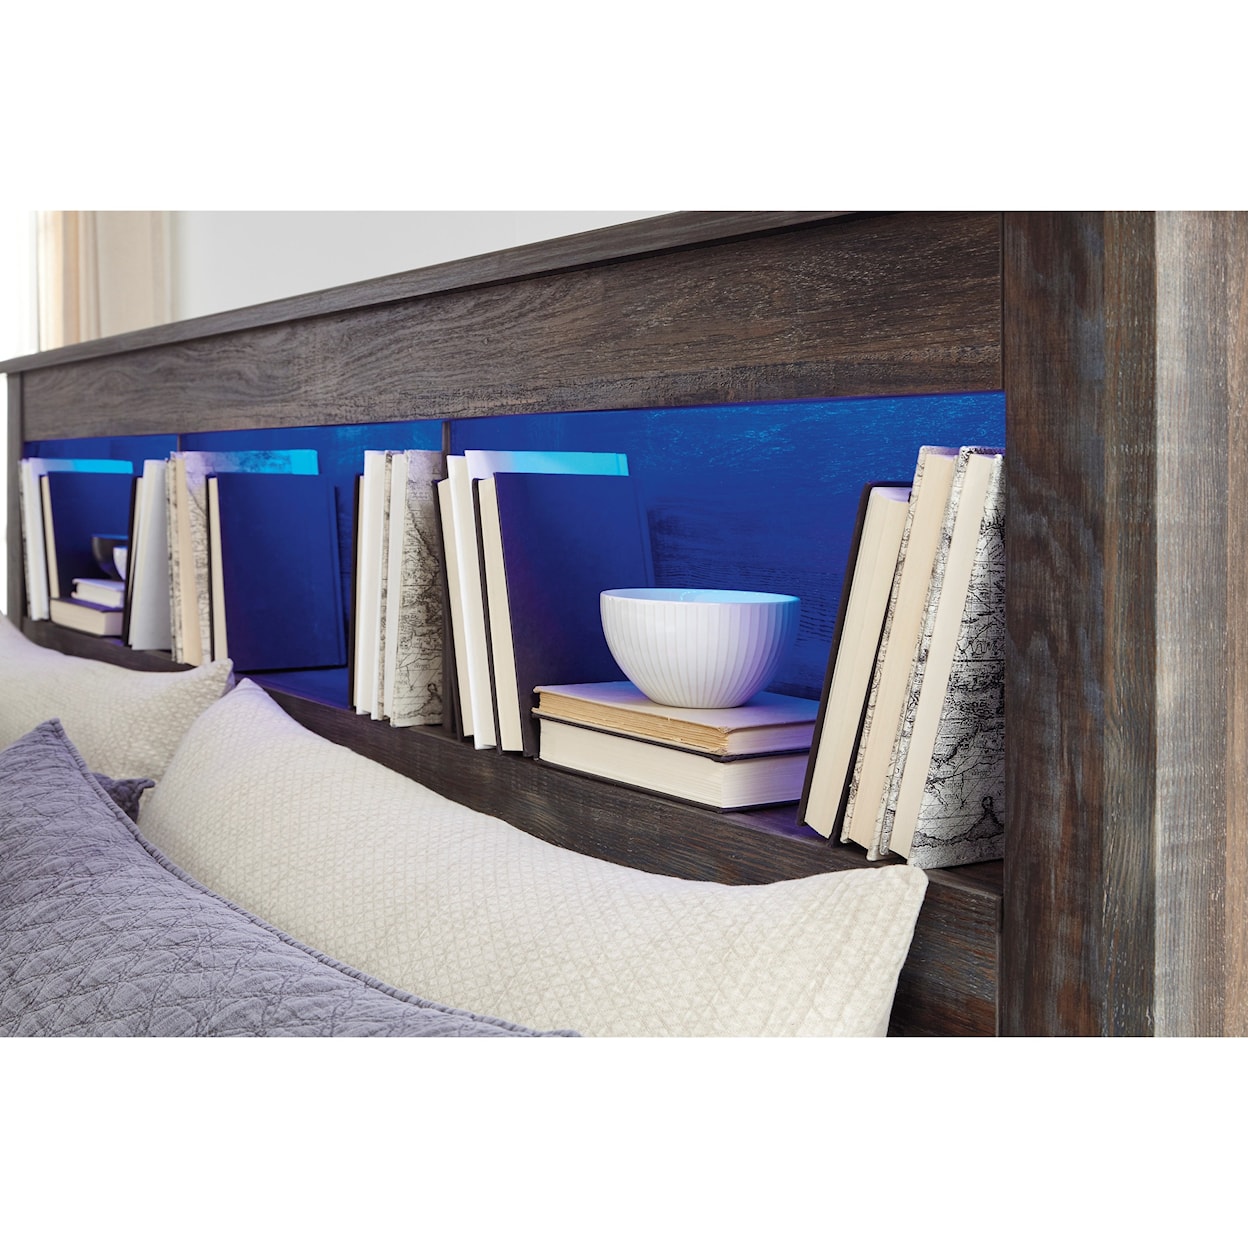 Benchcraft Drystan Full Bookcase Bed with Underbed Storage